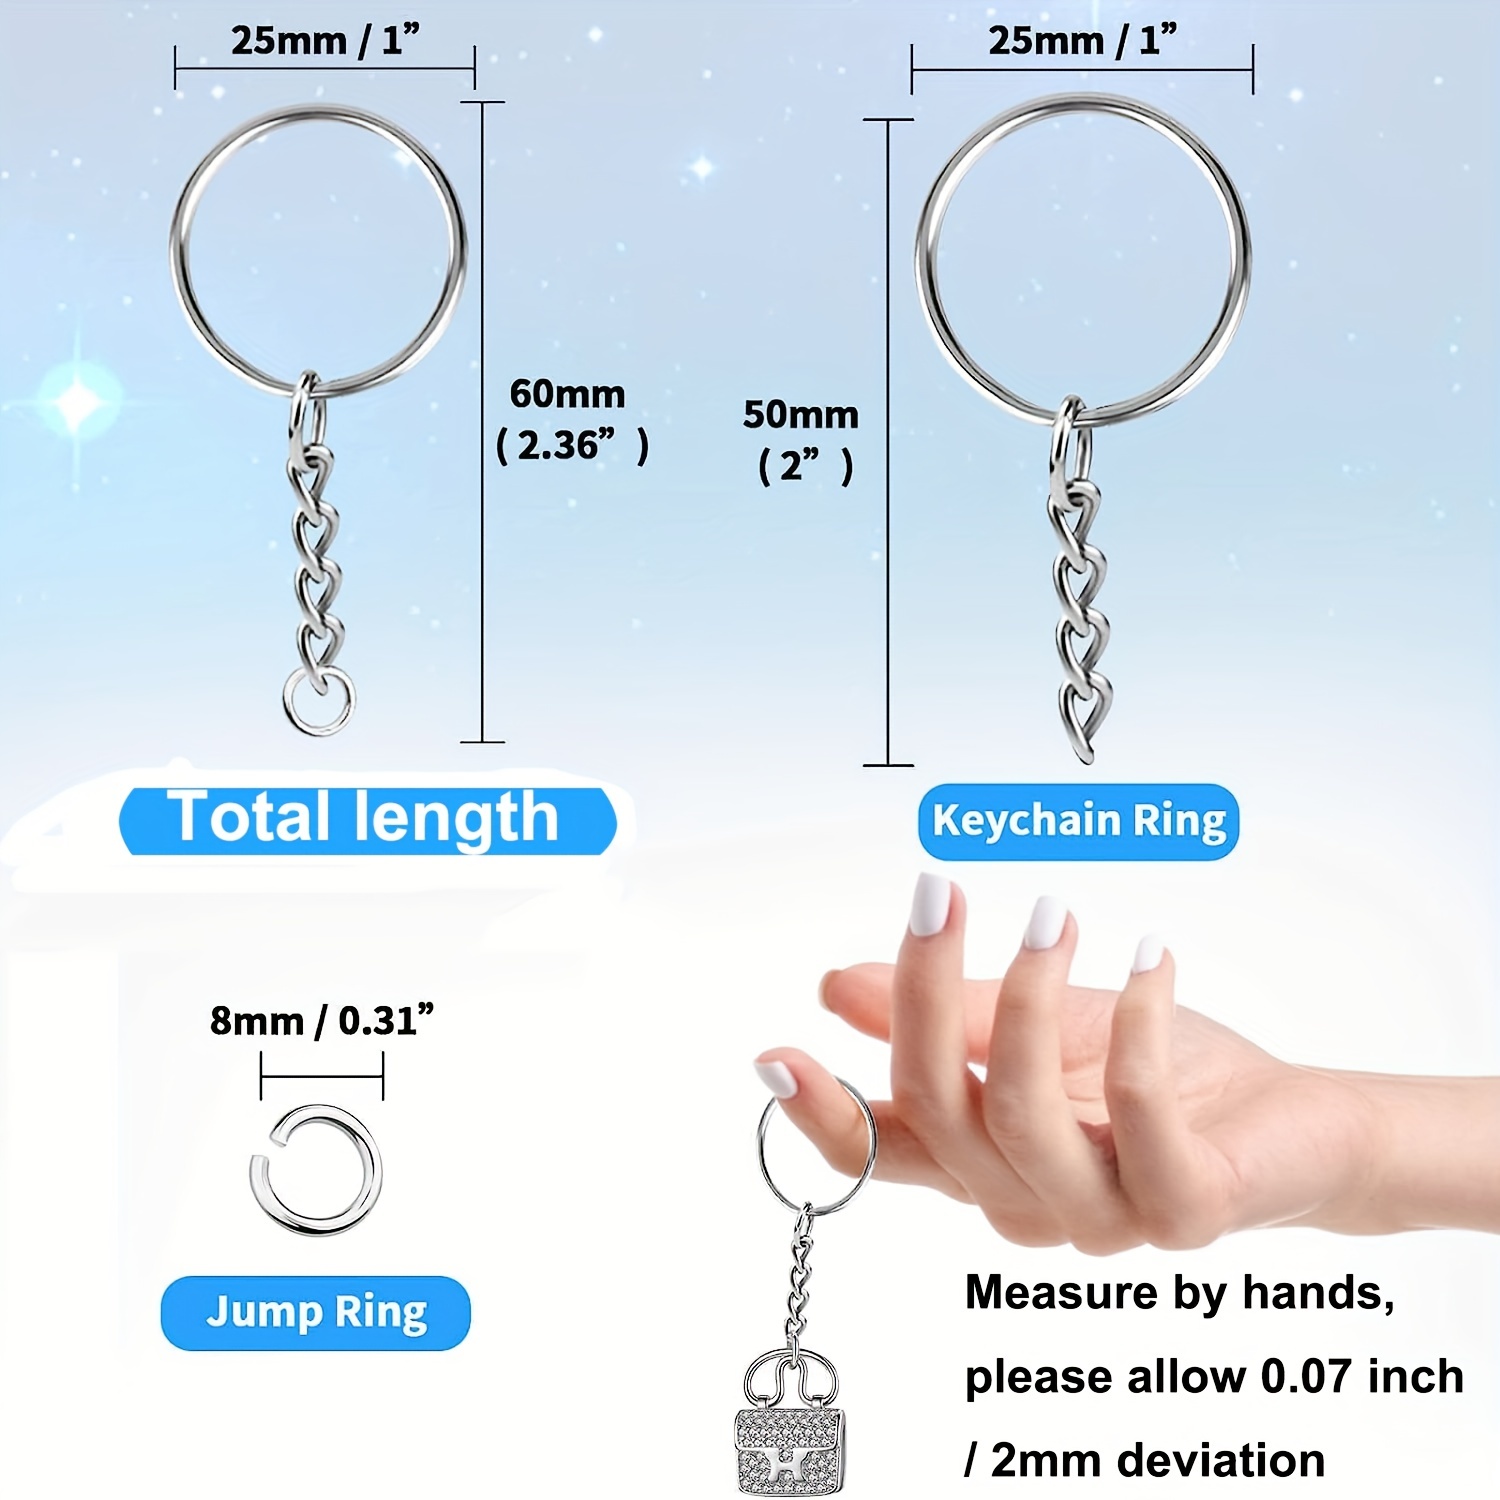 Split Key Ring with Chain and Open Jump Ring 1 Inch Key Chain Nickel Plated  Silver 120pcs Bulk for Crafts 